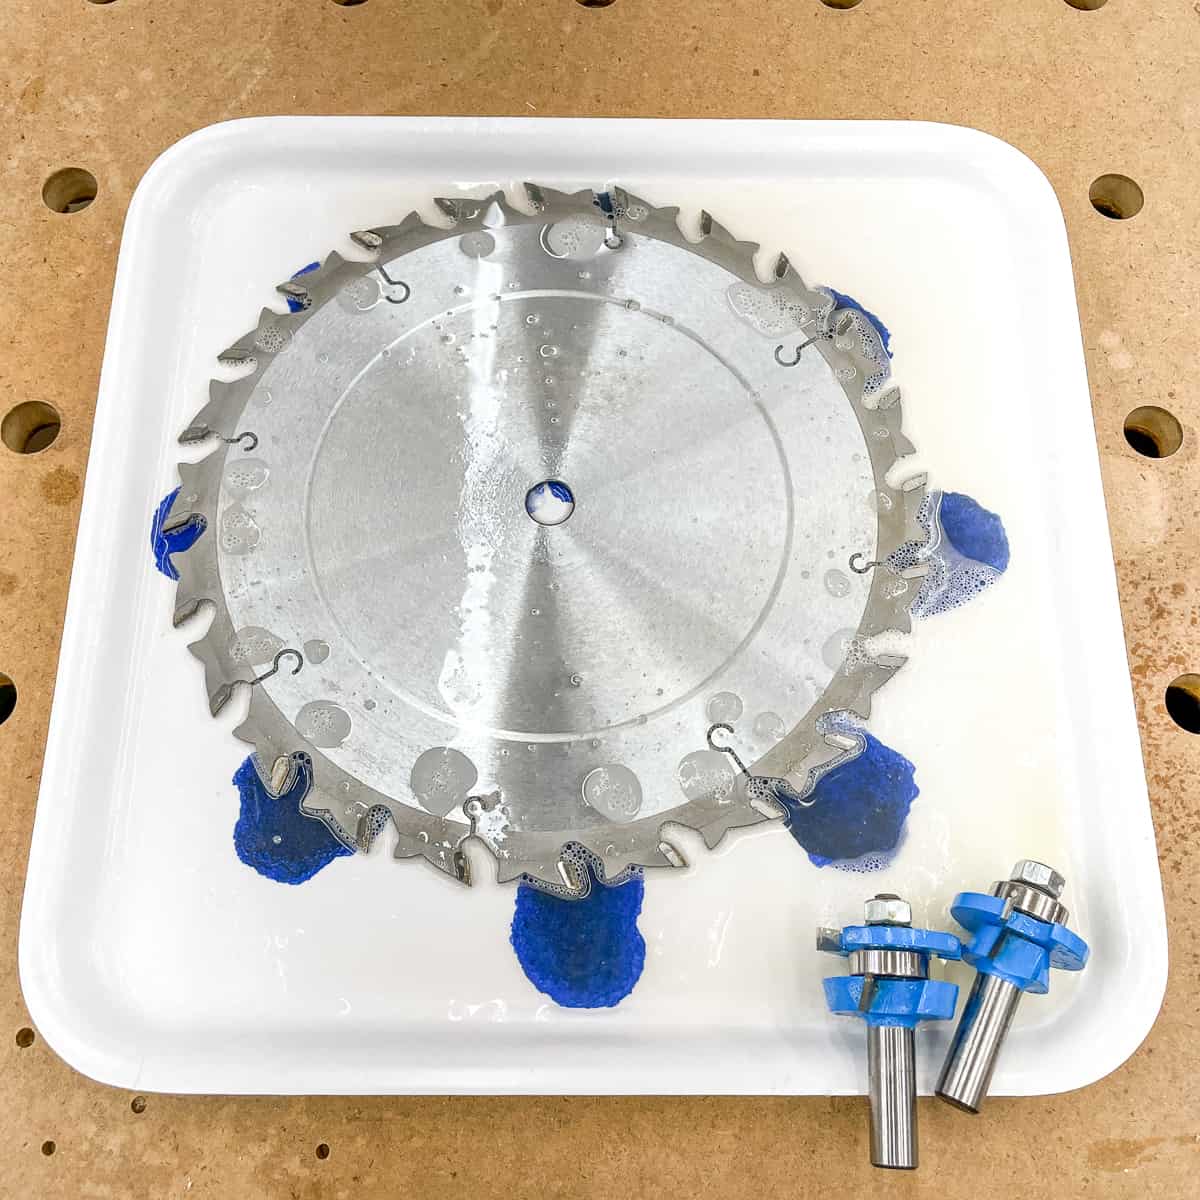 soaking a table saw blade and router bits in a shallow tray with blade cleaner